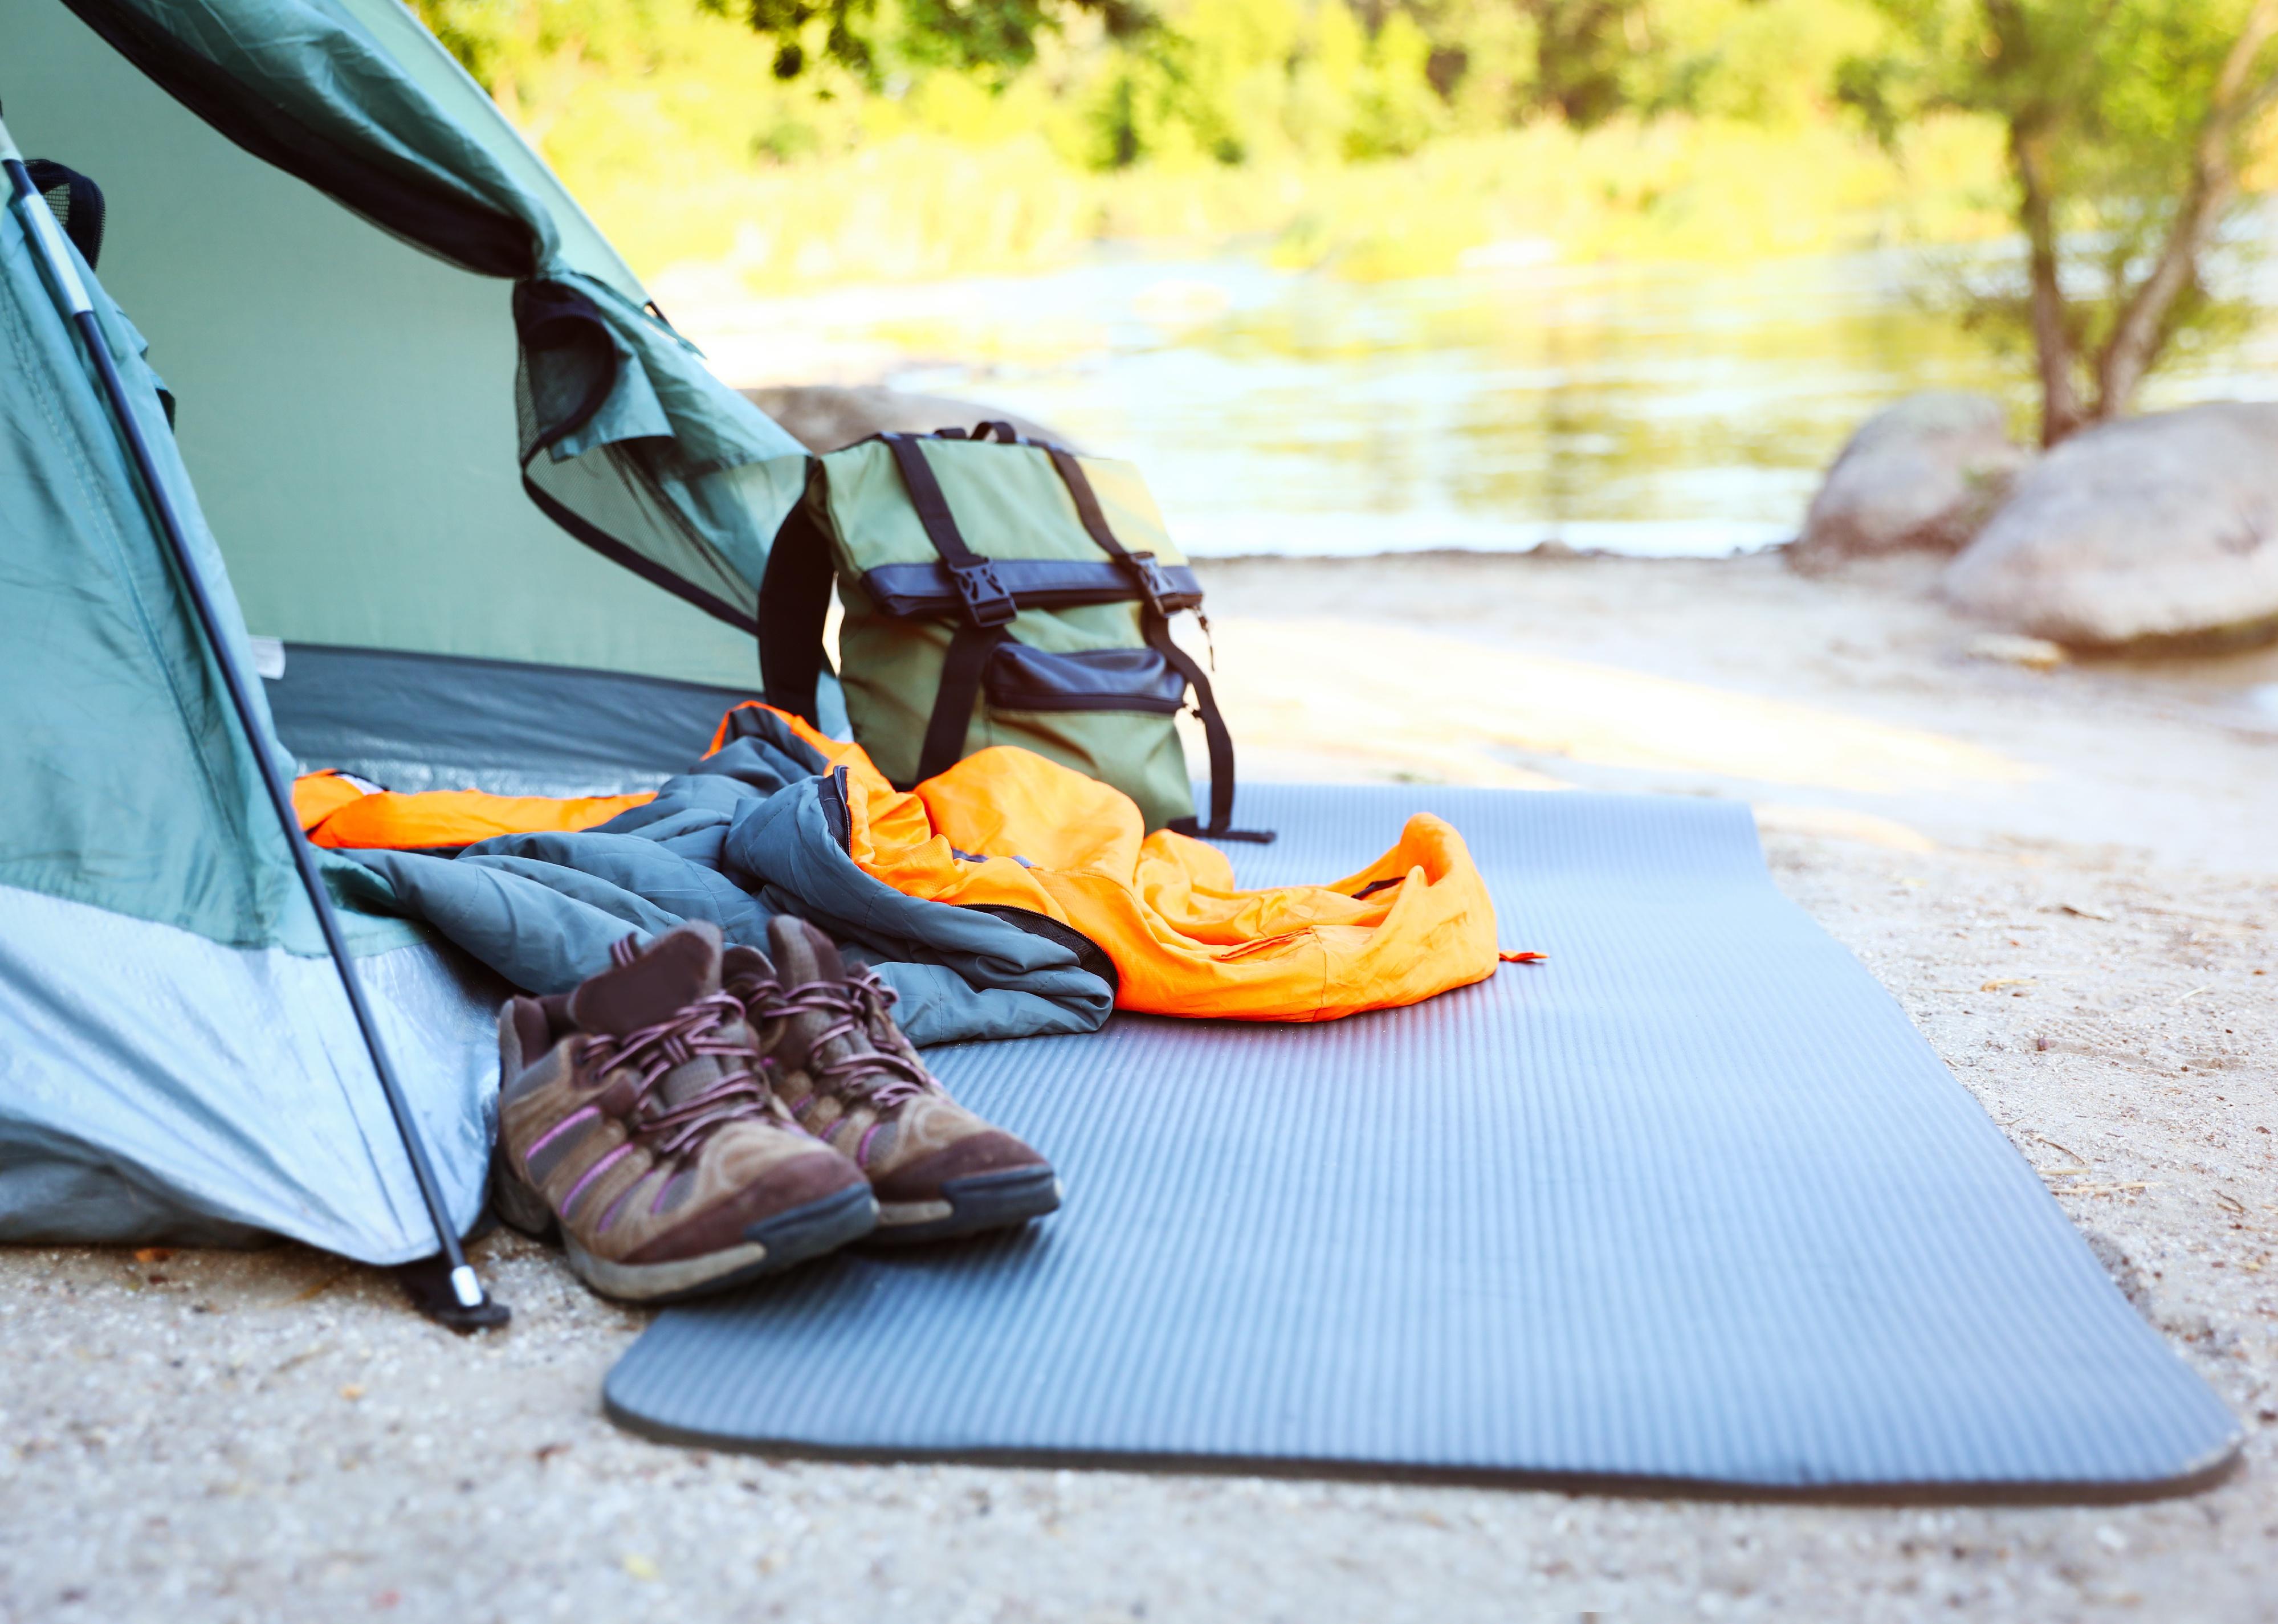 Sleeping bag and other camping gear outdoors